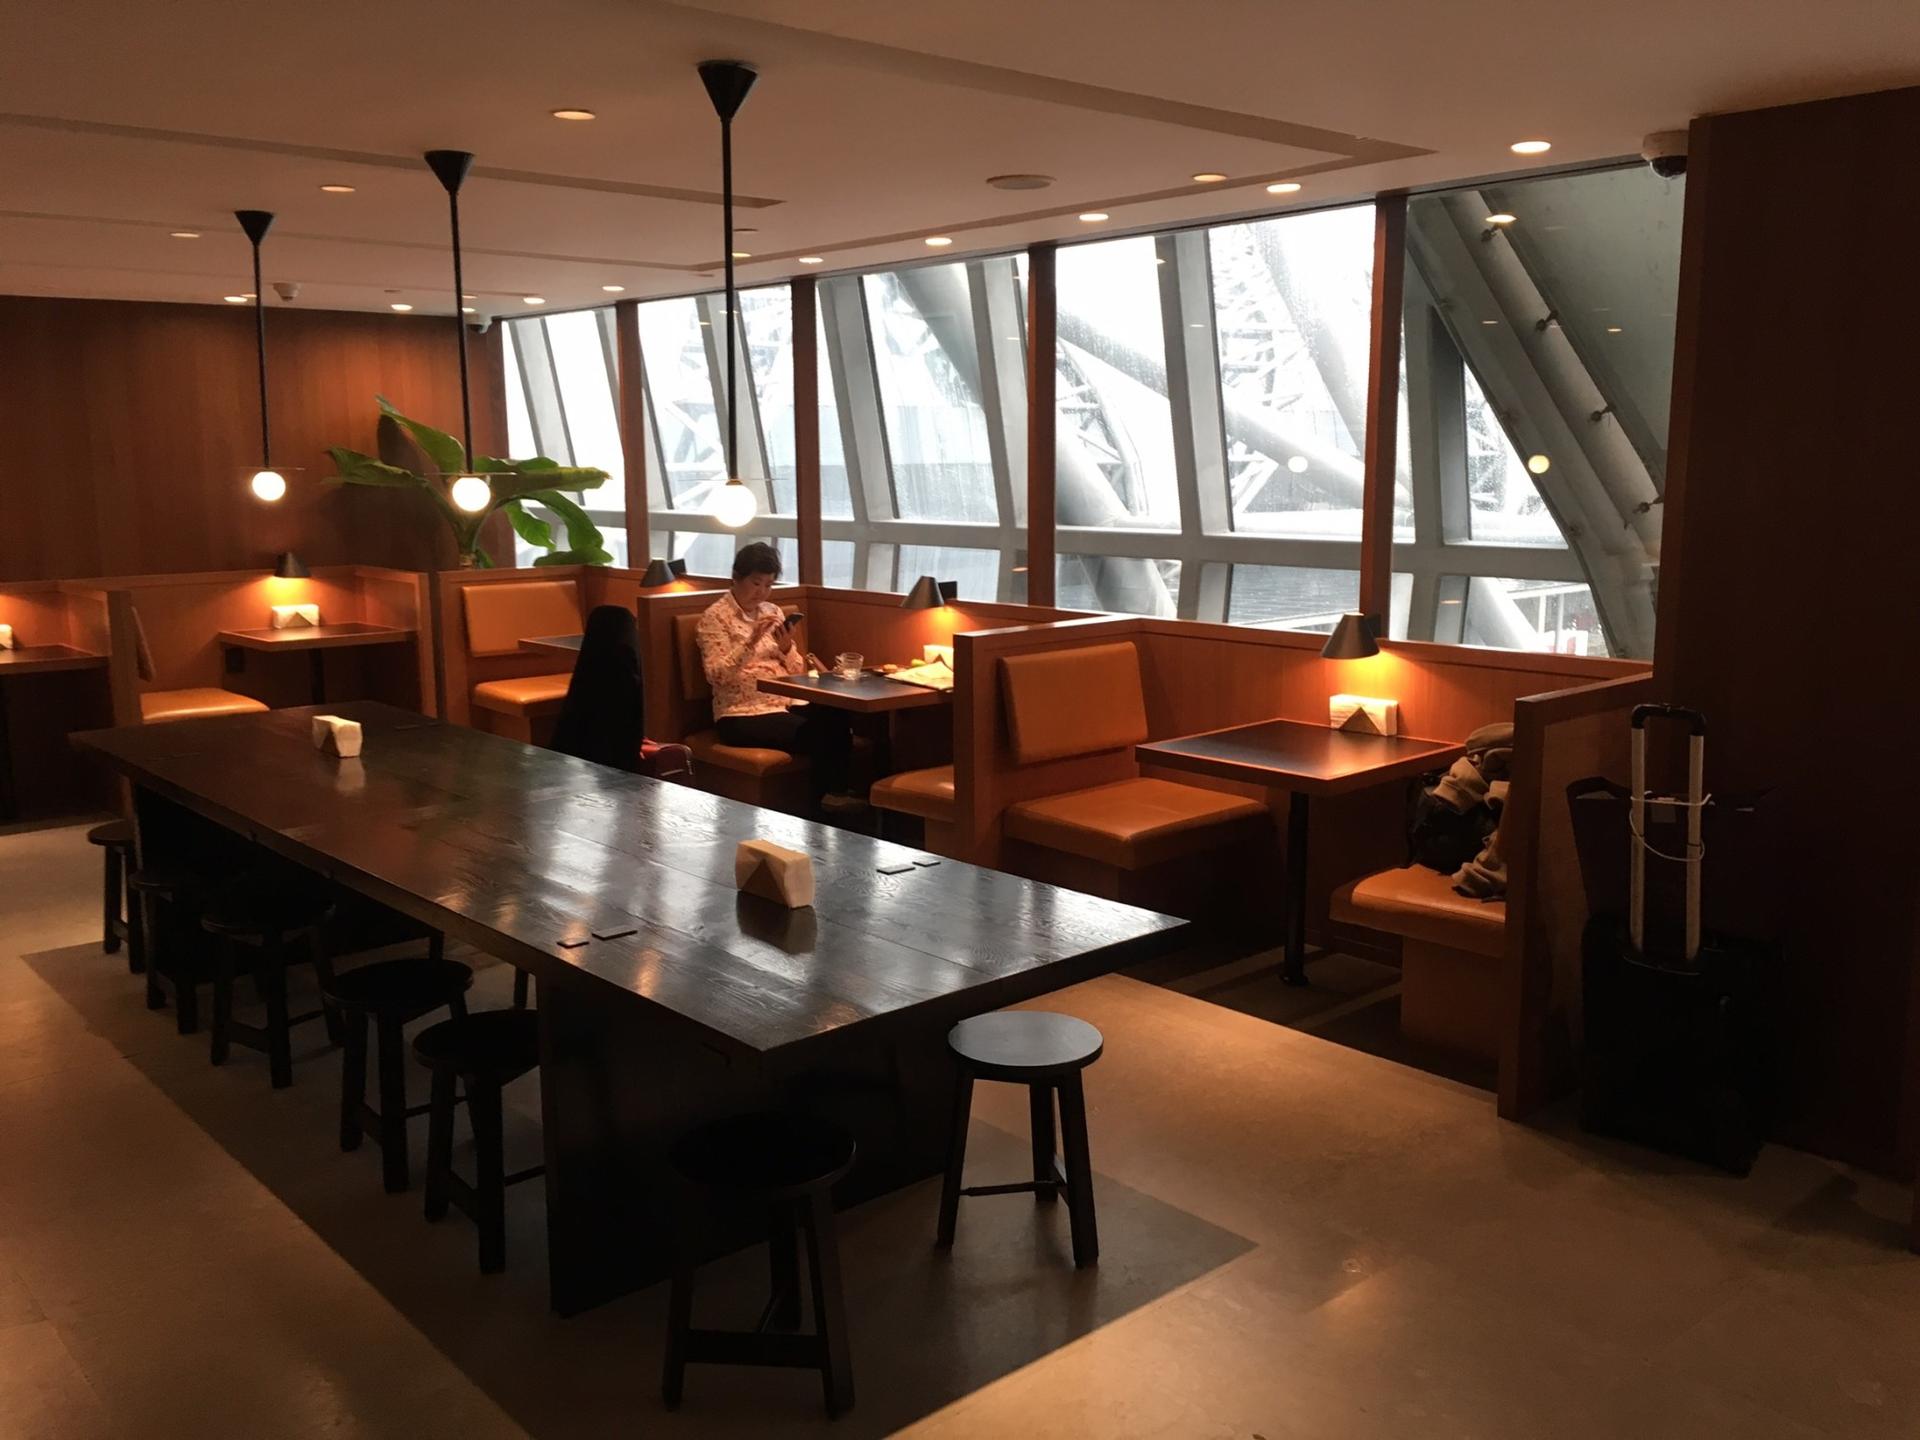 Cathay Pacific First and Business Class Lounge image 49 of 69